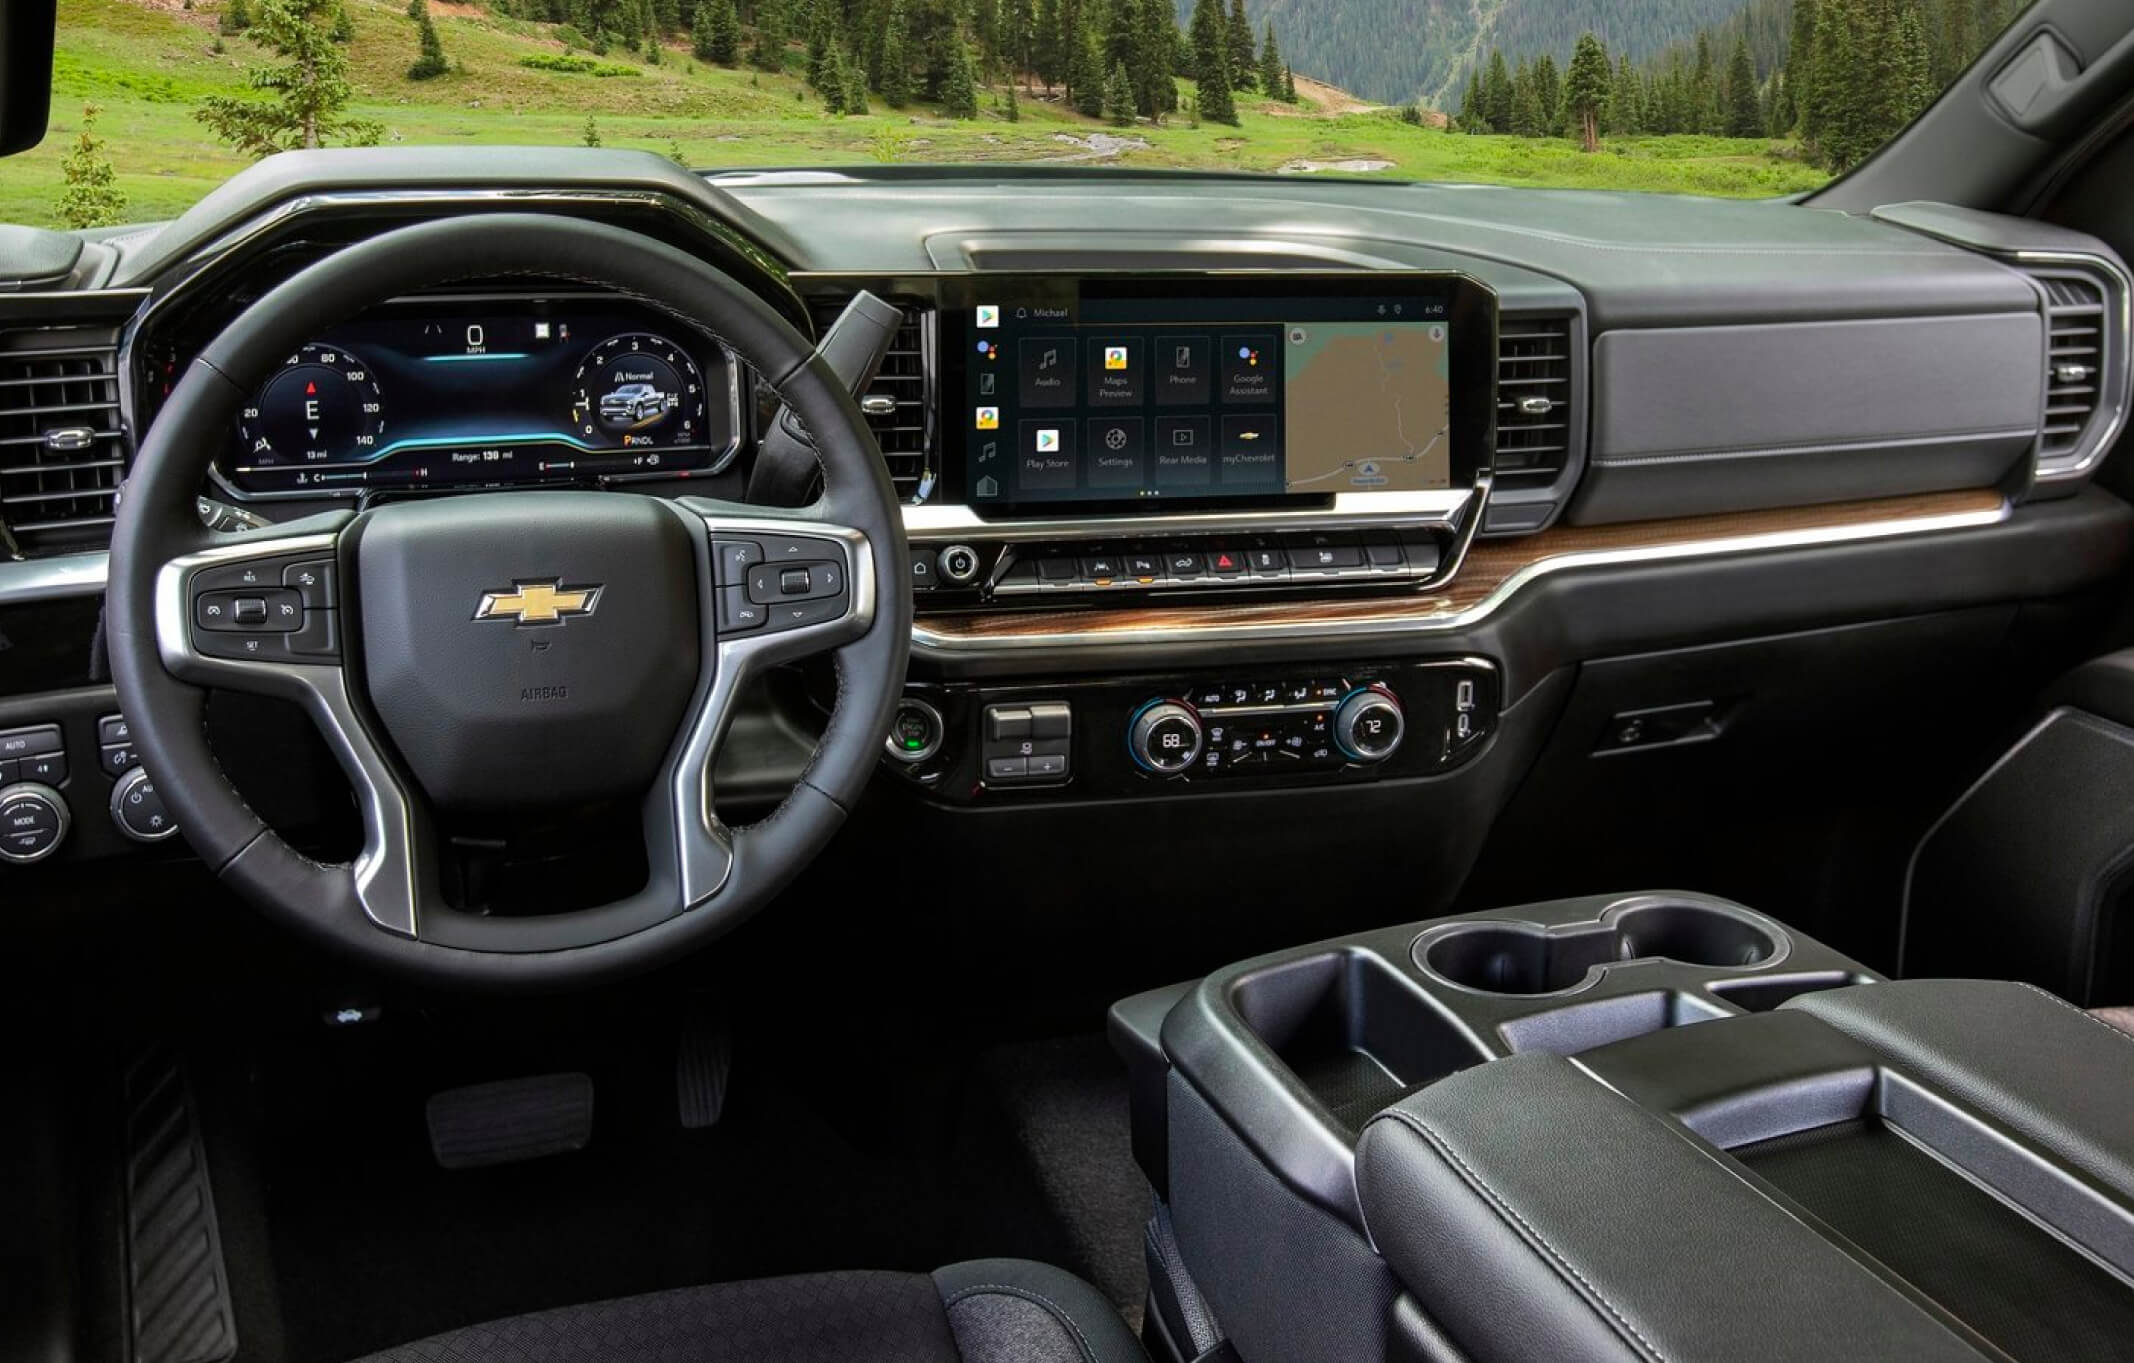 GM - Make a Powerful Choice with the 2022 Sierra AT4X and Silverado ZR2 - City Buick